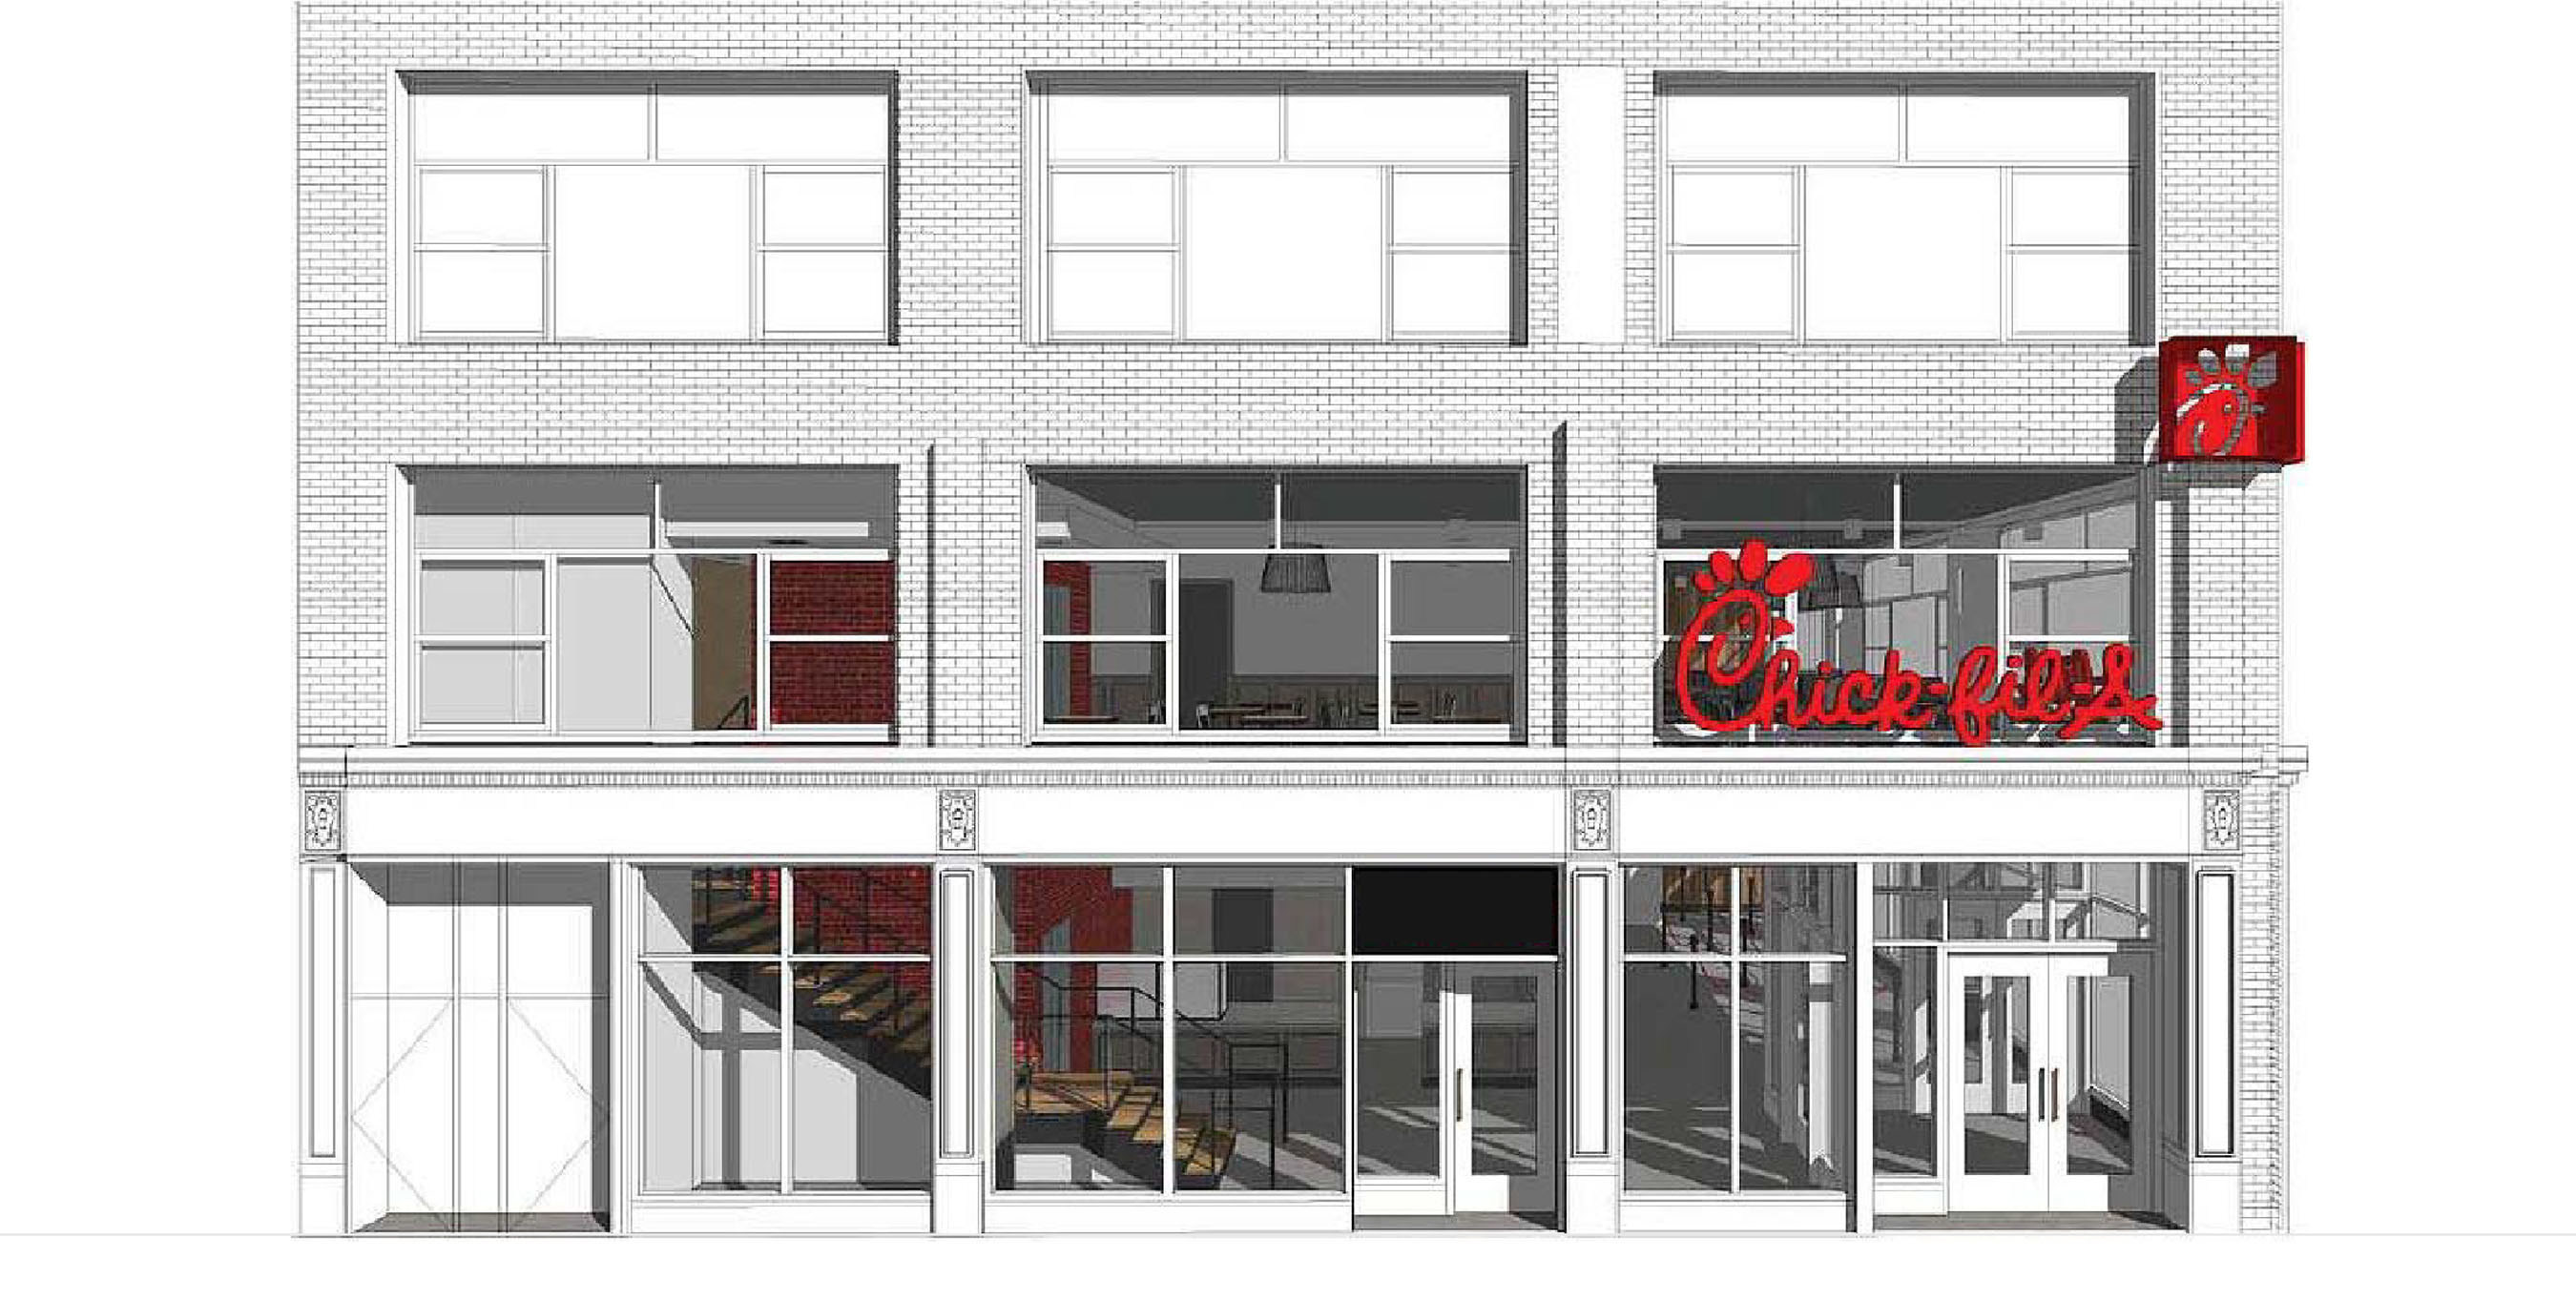 Rendering of Chick-fil-A at 37th and 6th, the first freestanding Chick-fil-A restaurant in New York City, which is set to open in the Garment District on October 3, 2015.